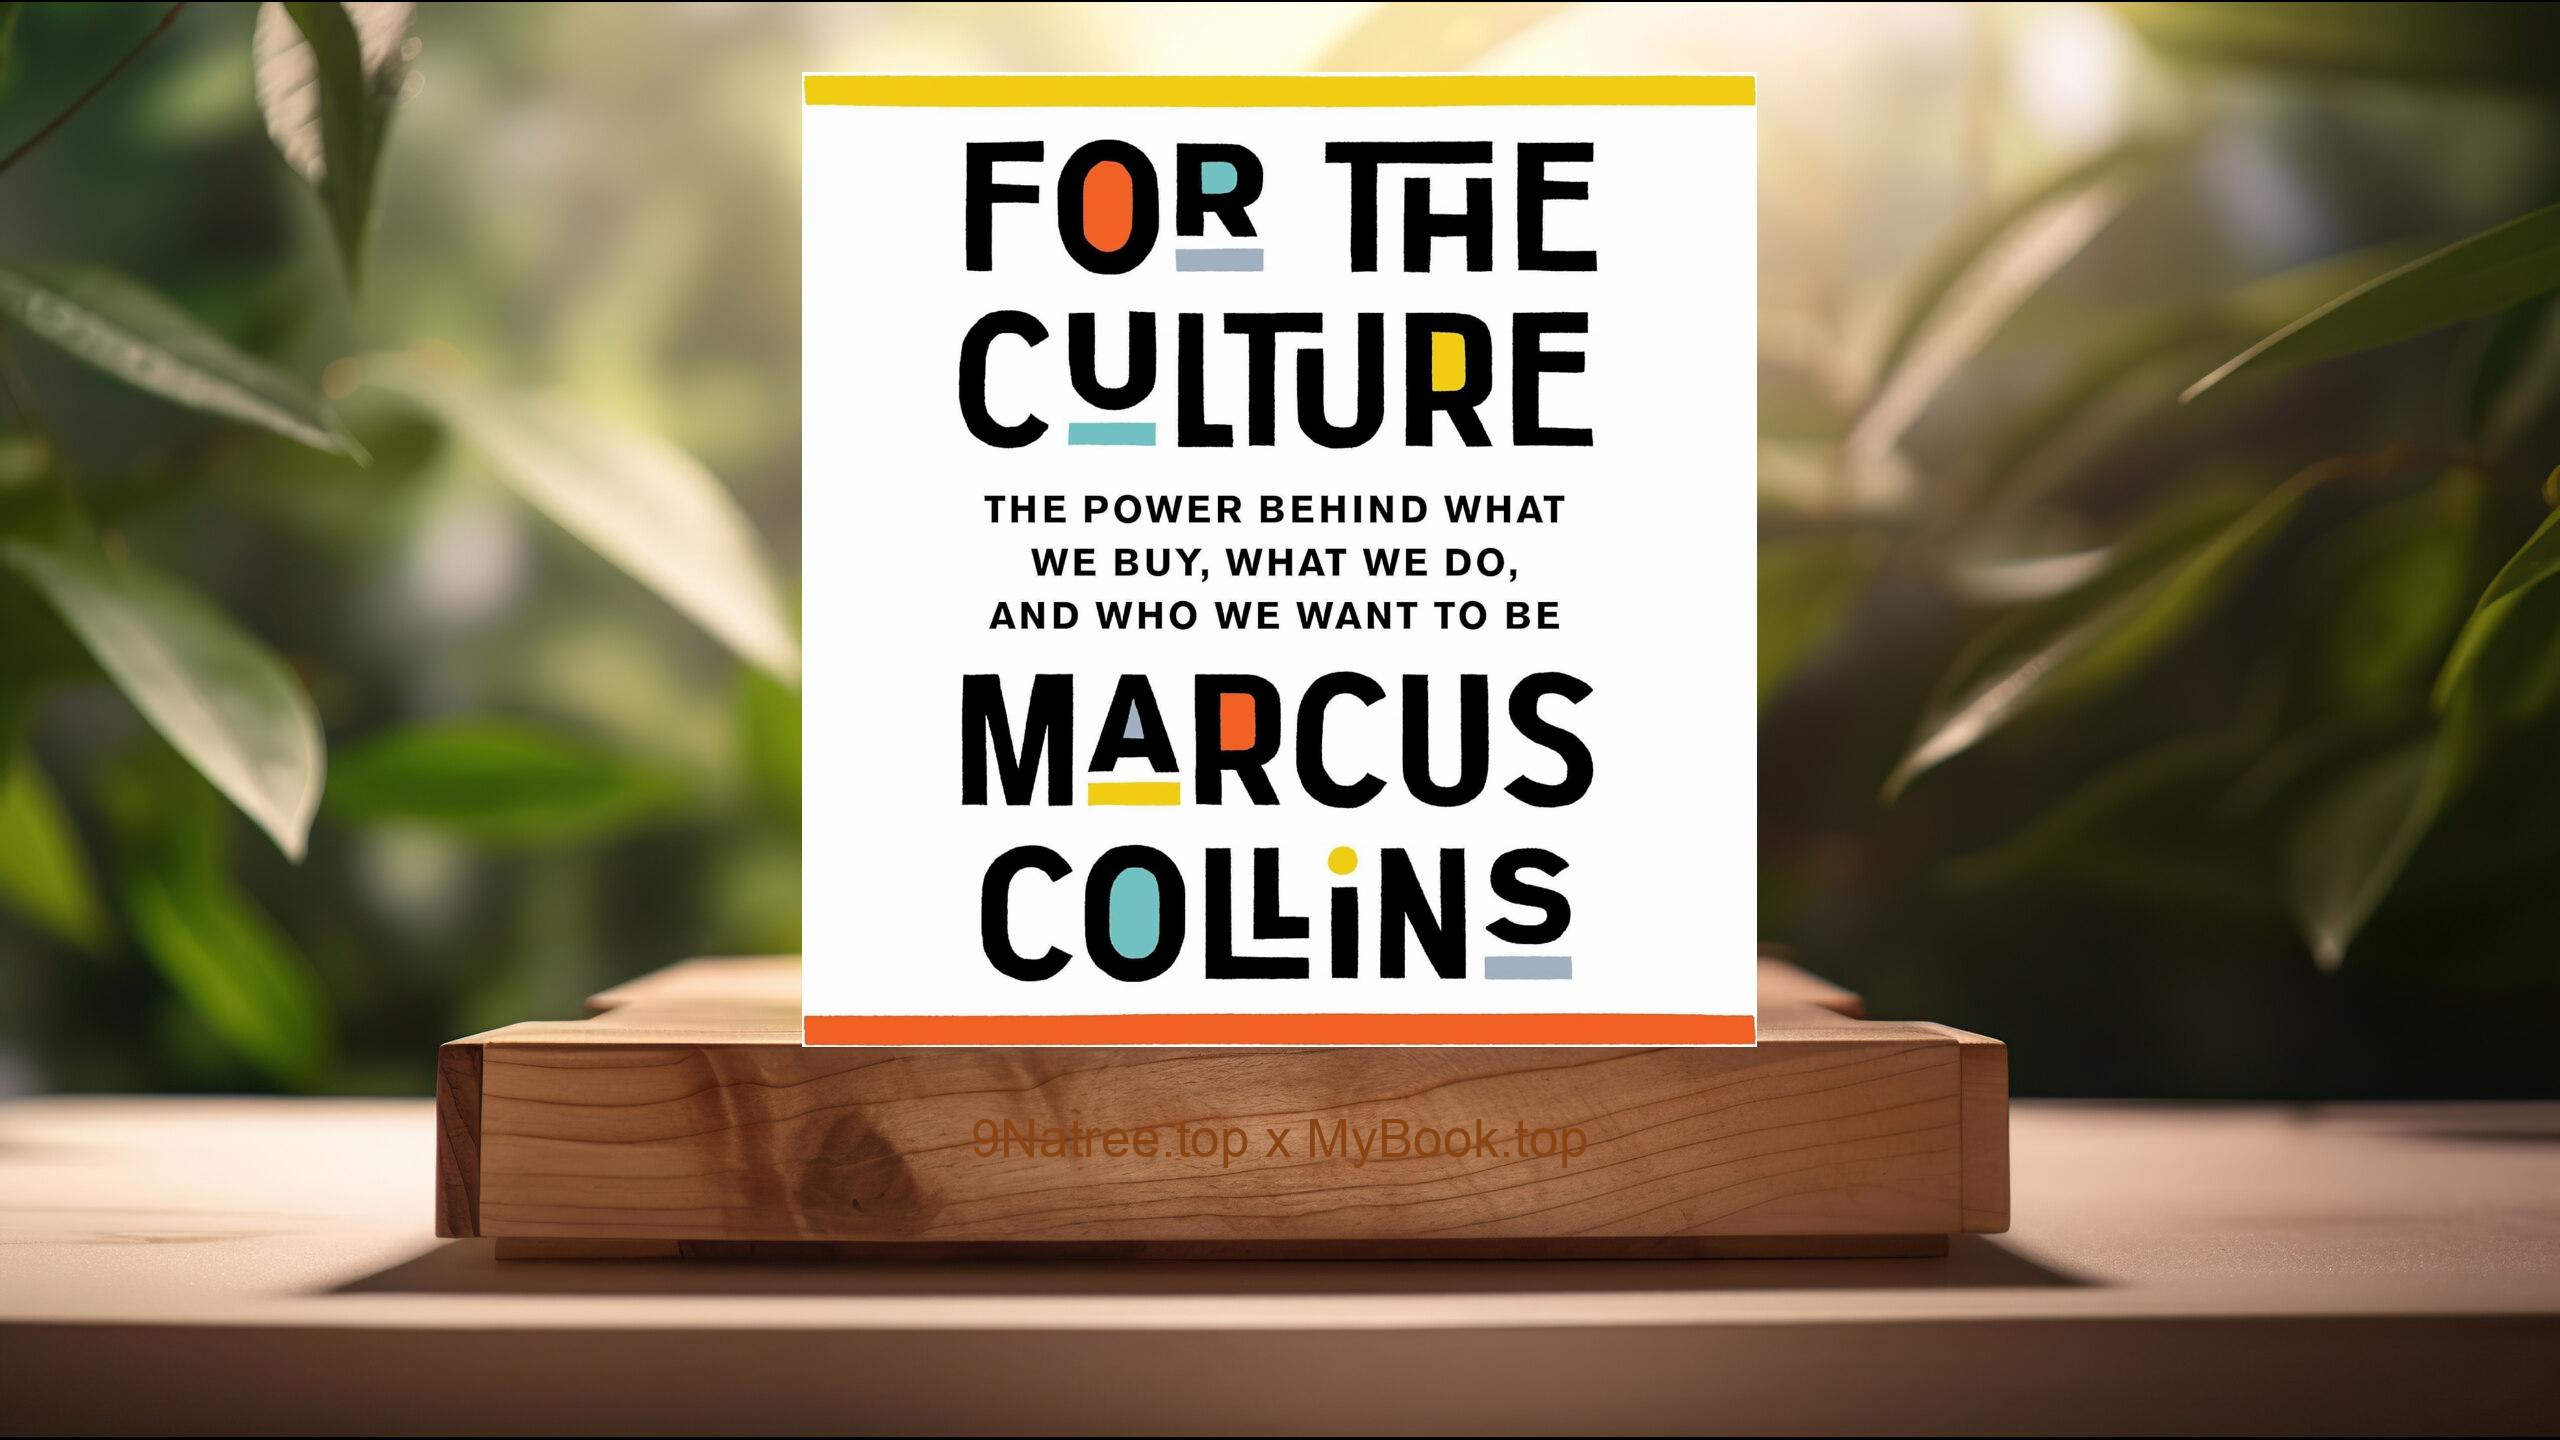 [Review] For the Culture: The Power Behind What We Buy, What We Do, and Who We Want to Be (Marcus Collins) Summarized